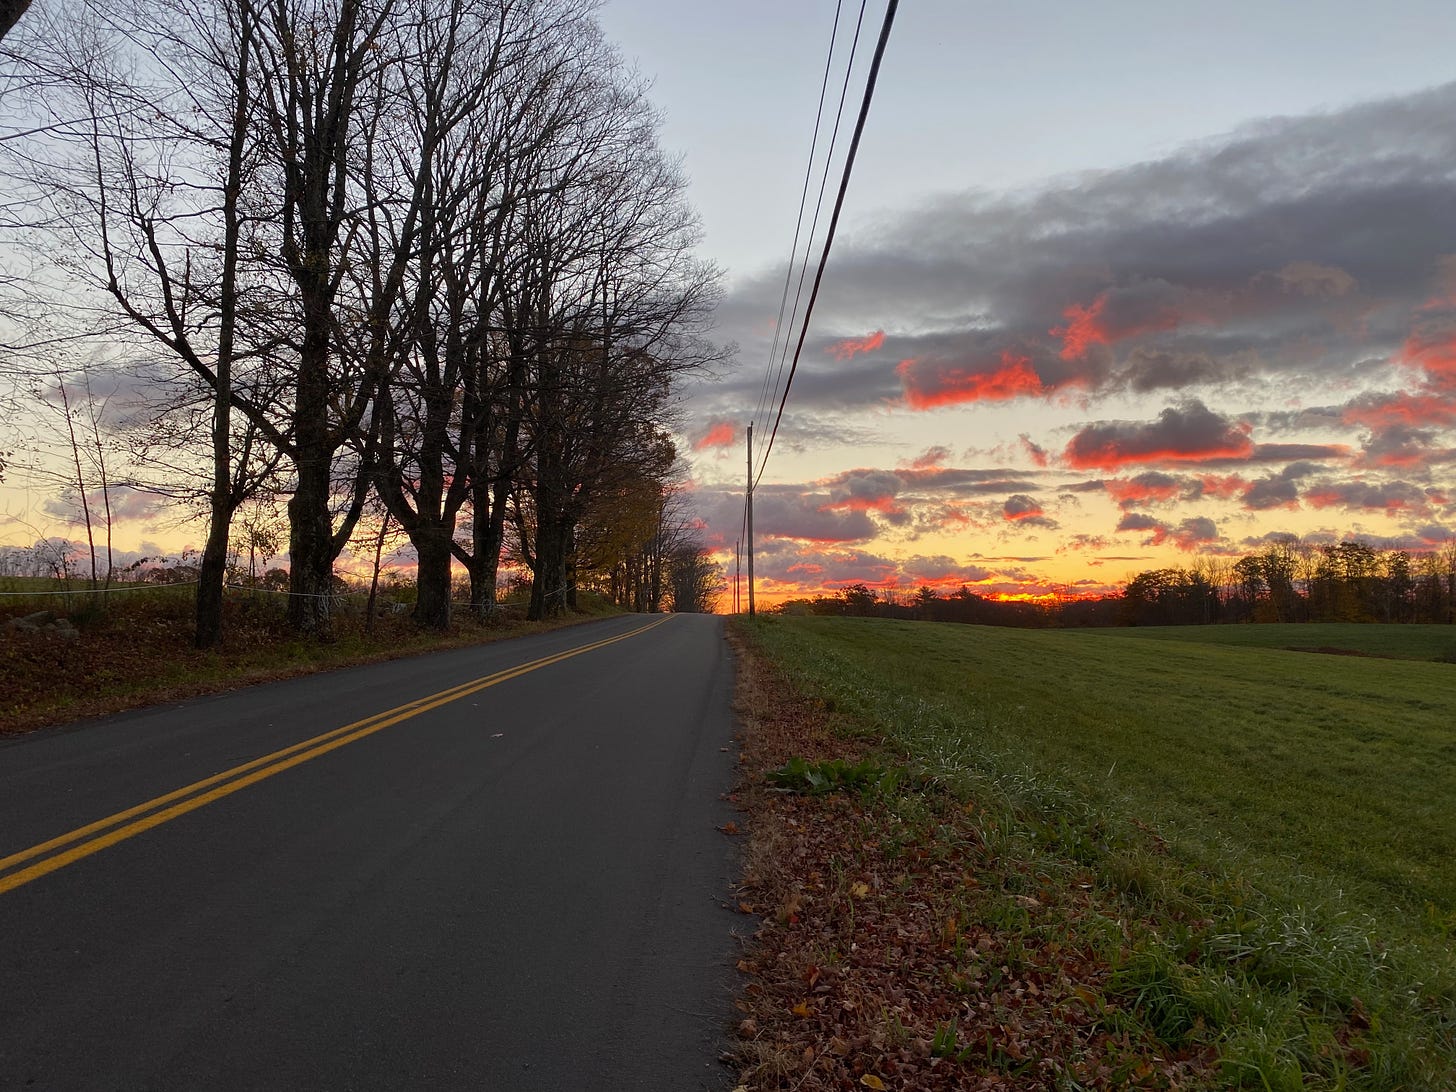 A paved road at sunrise. On the left is a tall row of leafless trees, silhouetted against the grey and purple sky. On the right is a green field. Above the field the sky is awash in colors: gold, pink, grey, and orange. The sun is just visible on the horizon, and the clouds above are tinted pink and blue.